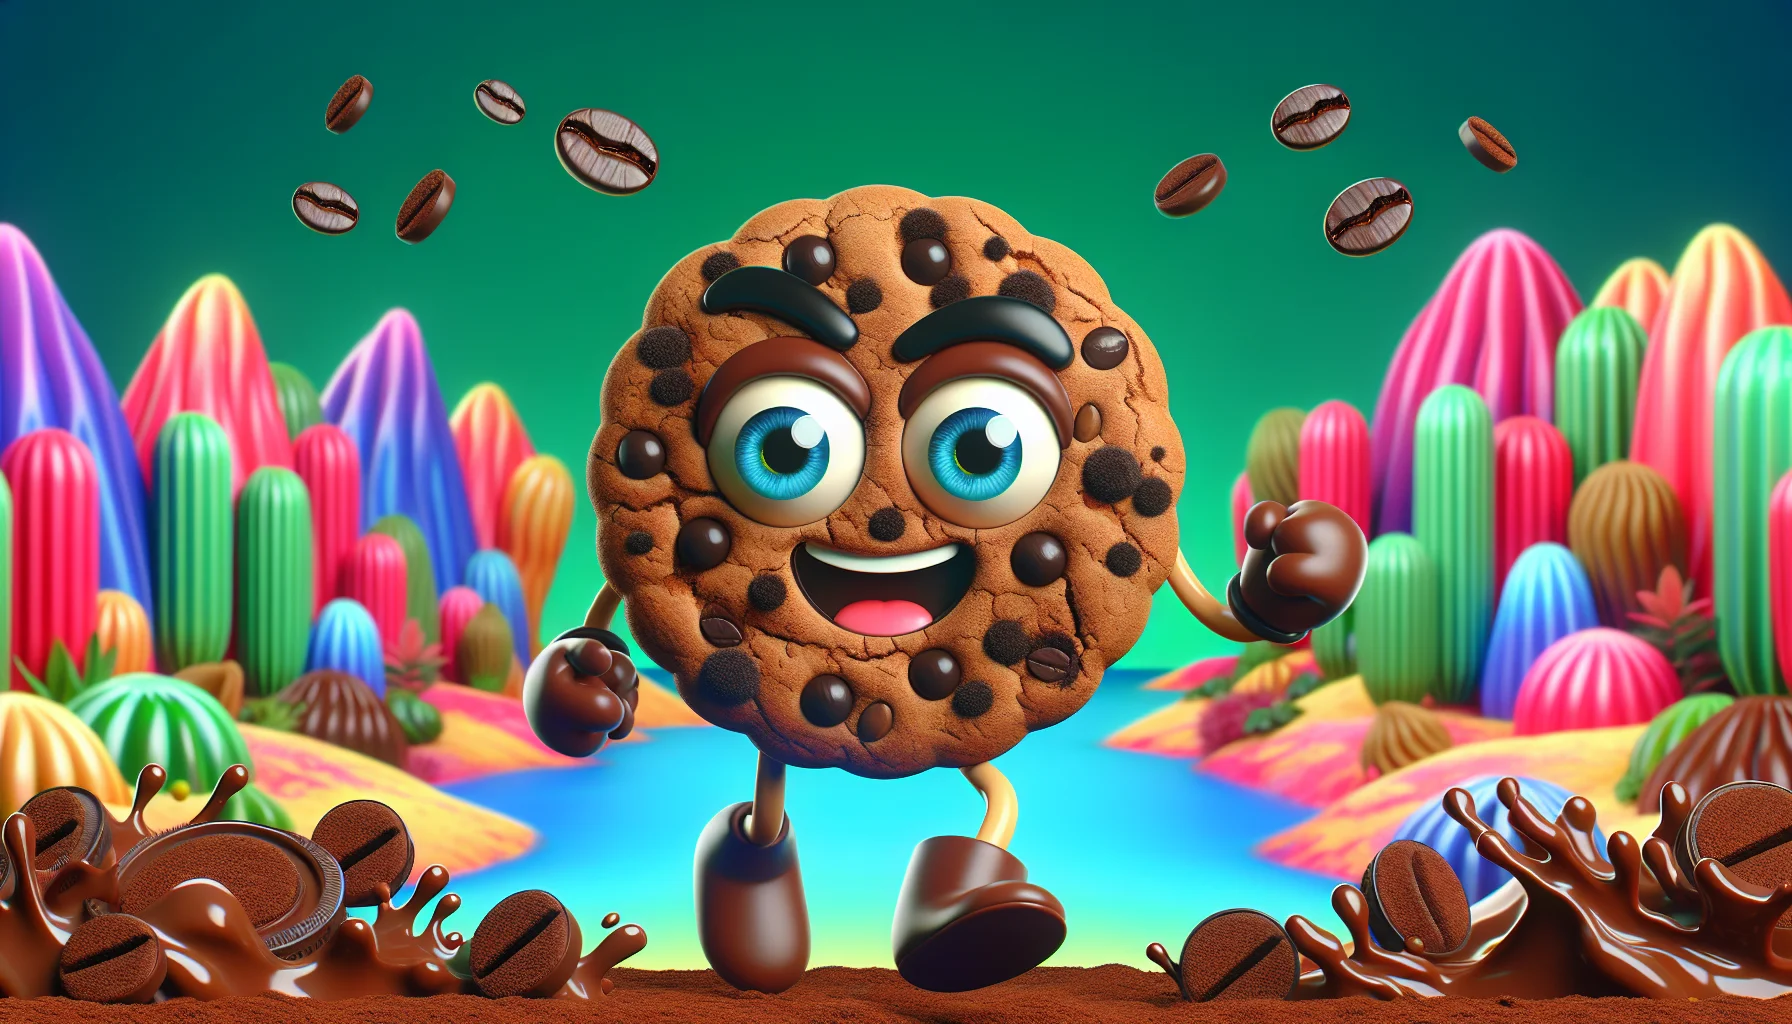 Generate an image of a chocolate-colored anthropomorphic cookie character with espresso shots as their eyes and cocoa dust as eyebrows. They are doing a funny dance in a vivid landscape with candy plants and coffee rivers, prompting joy and the sense people to enjoy themselves.